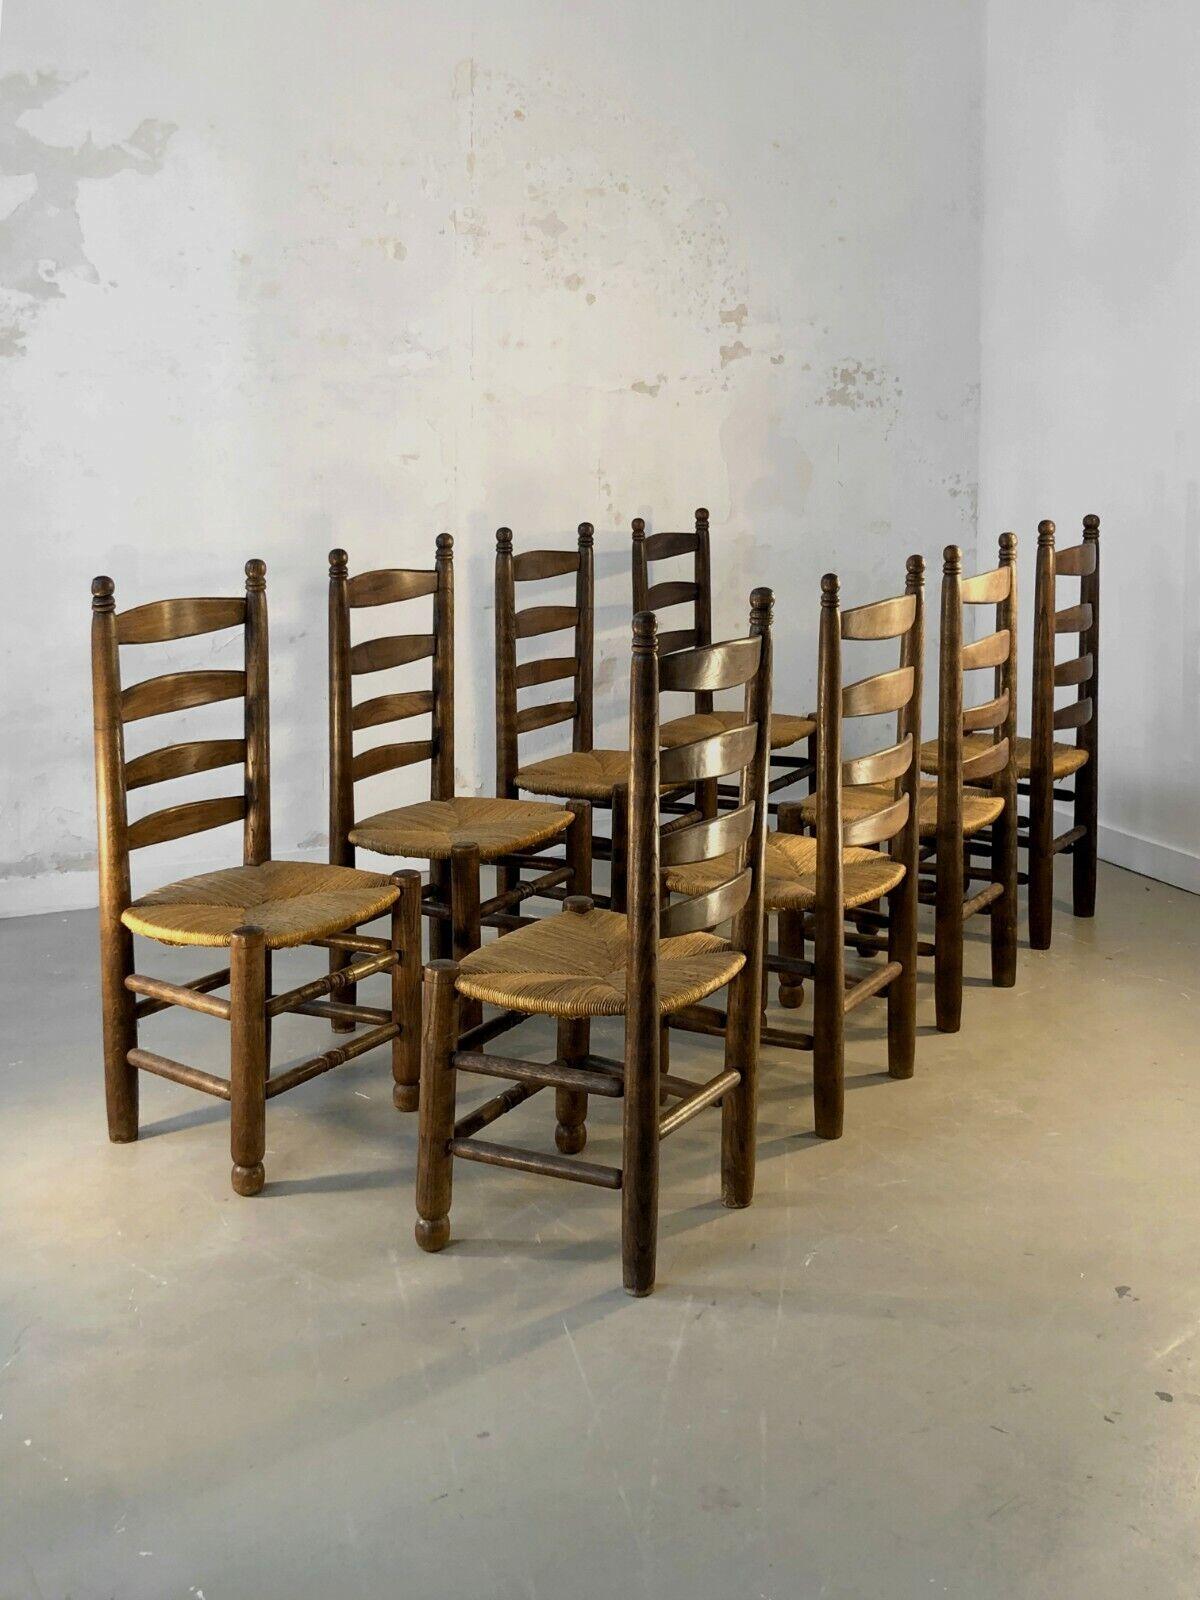 8 BRUTALIST RUSTIC MODERN Modernist CHAIRS by CHARLES DUDOUYDT, France 1950 For Sale 3